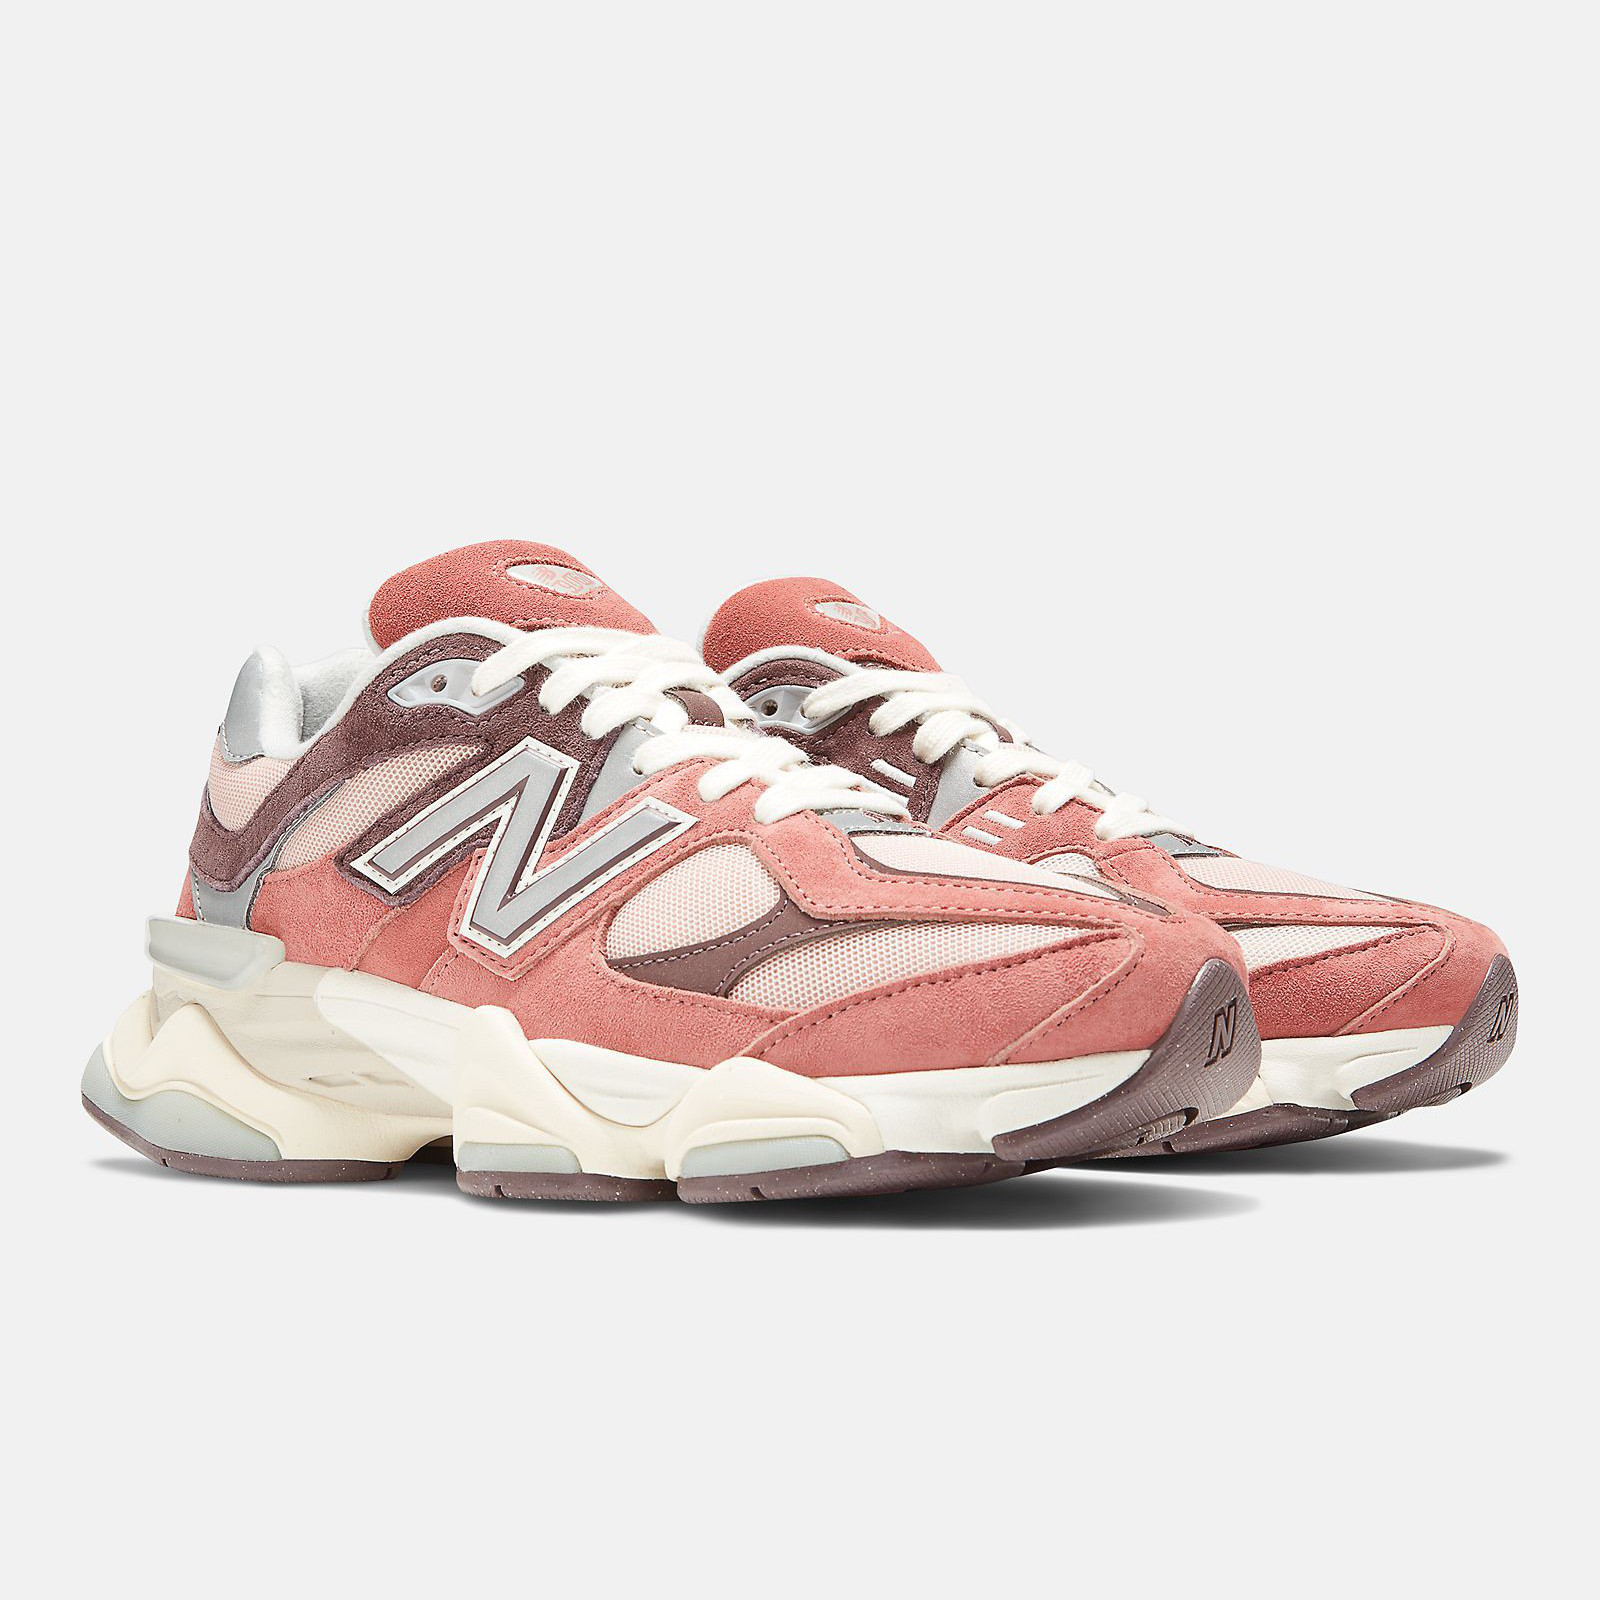 New Balance 9060
Mineral Red / Truffle